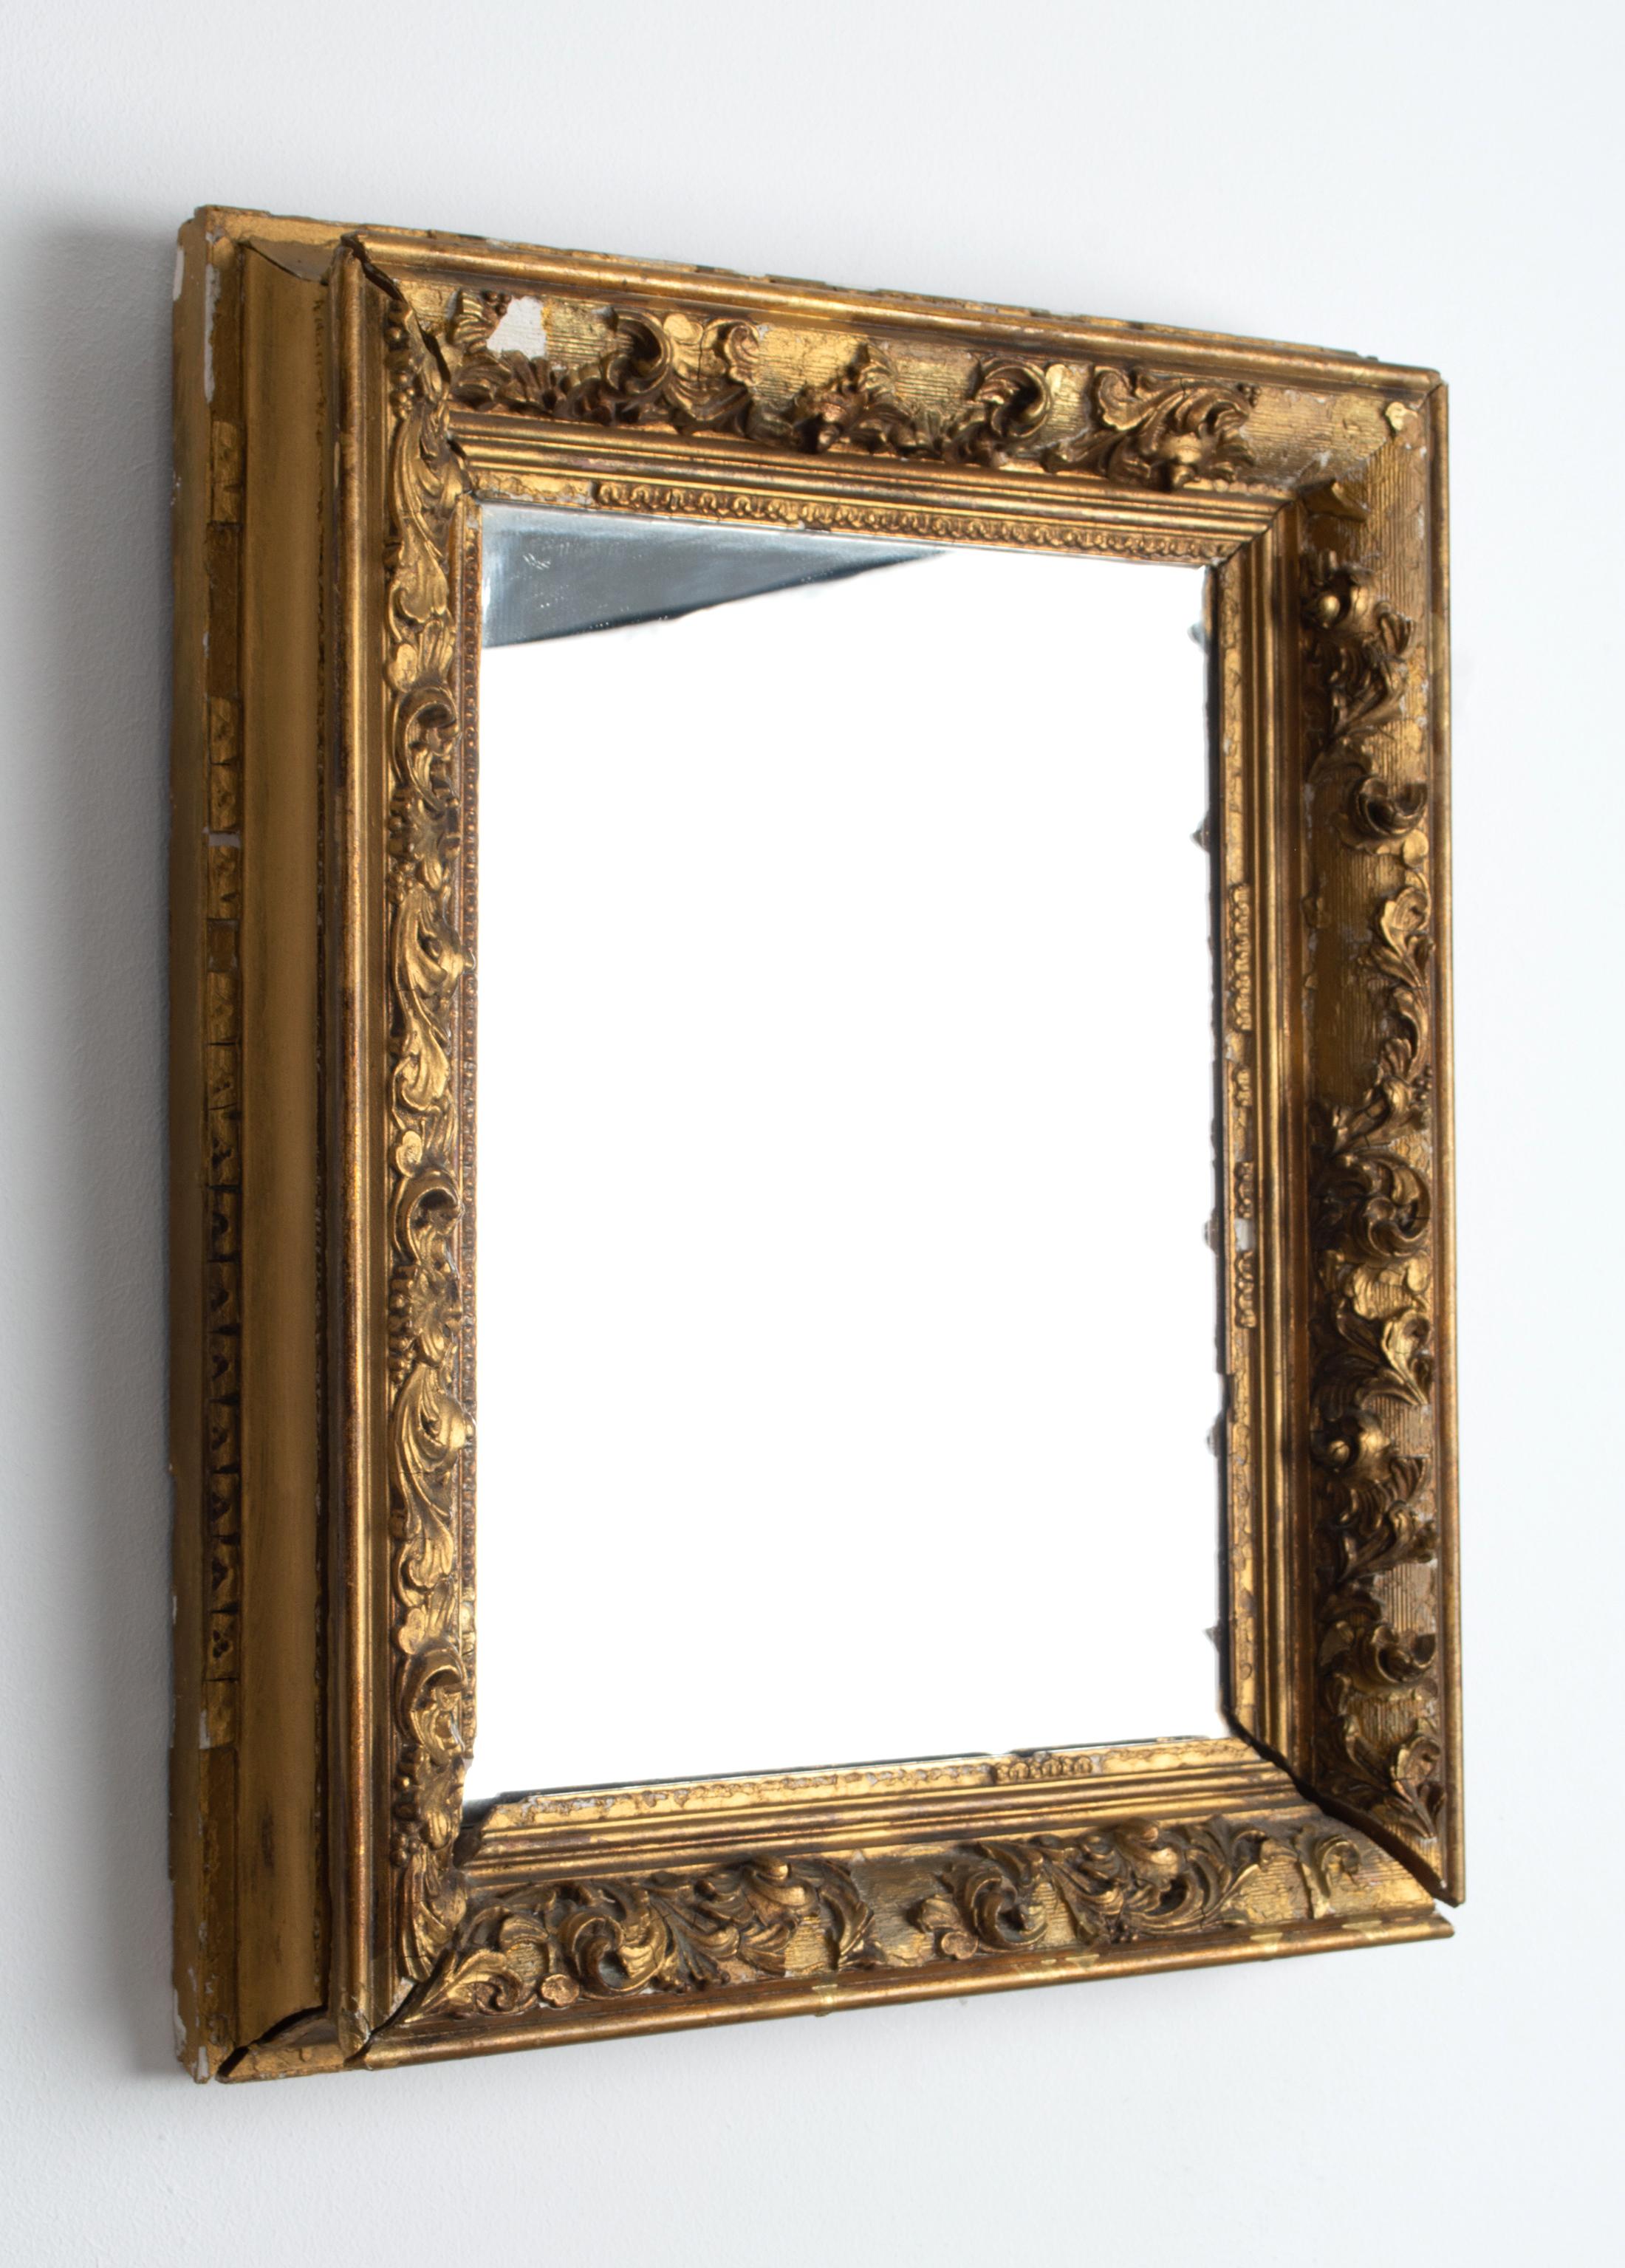 French 19th Century Wall Mirror Gesso Distressed frame
Originally a picture frame, now housing a mirror. Mirror could be removed to frame a painting once again.

Heavy distressing and losses to the gilt frame. Please refer to photos.